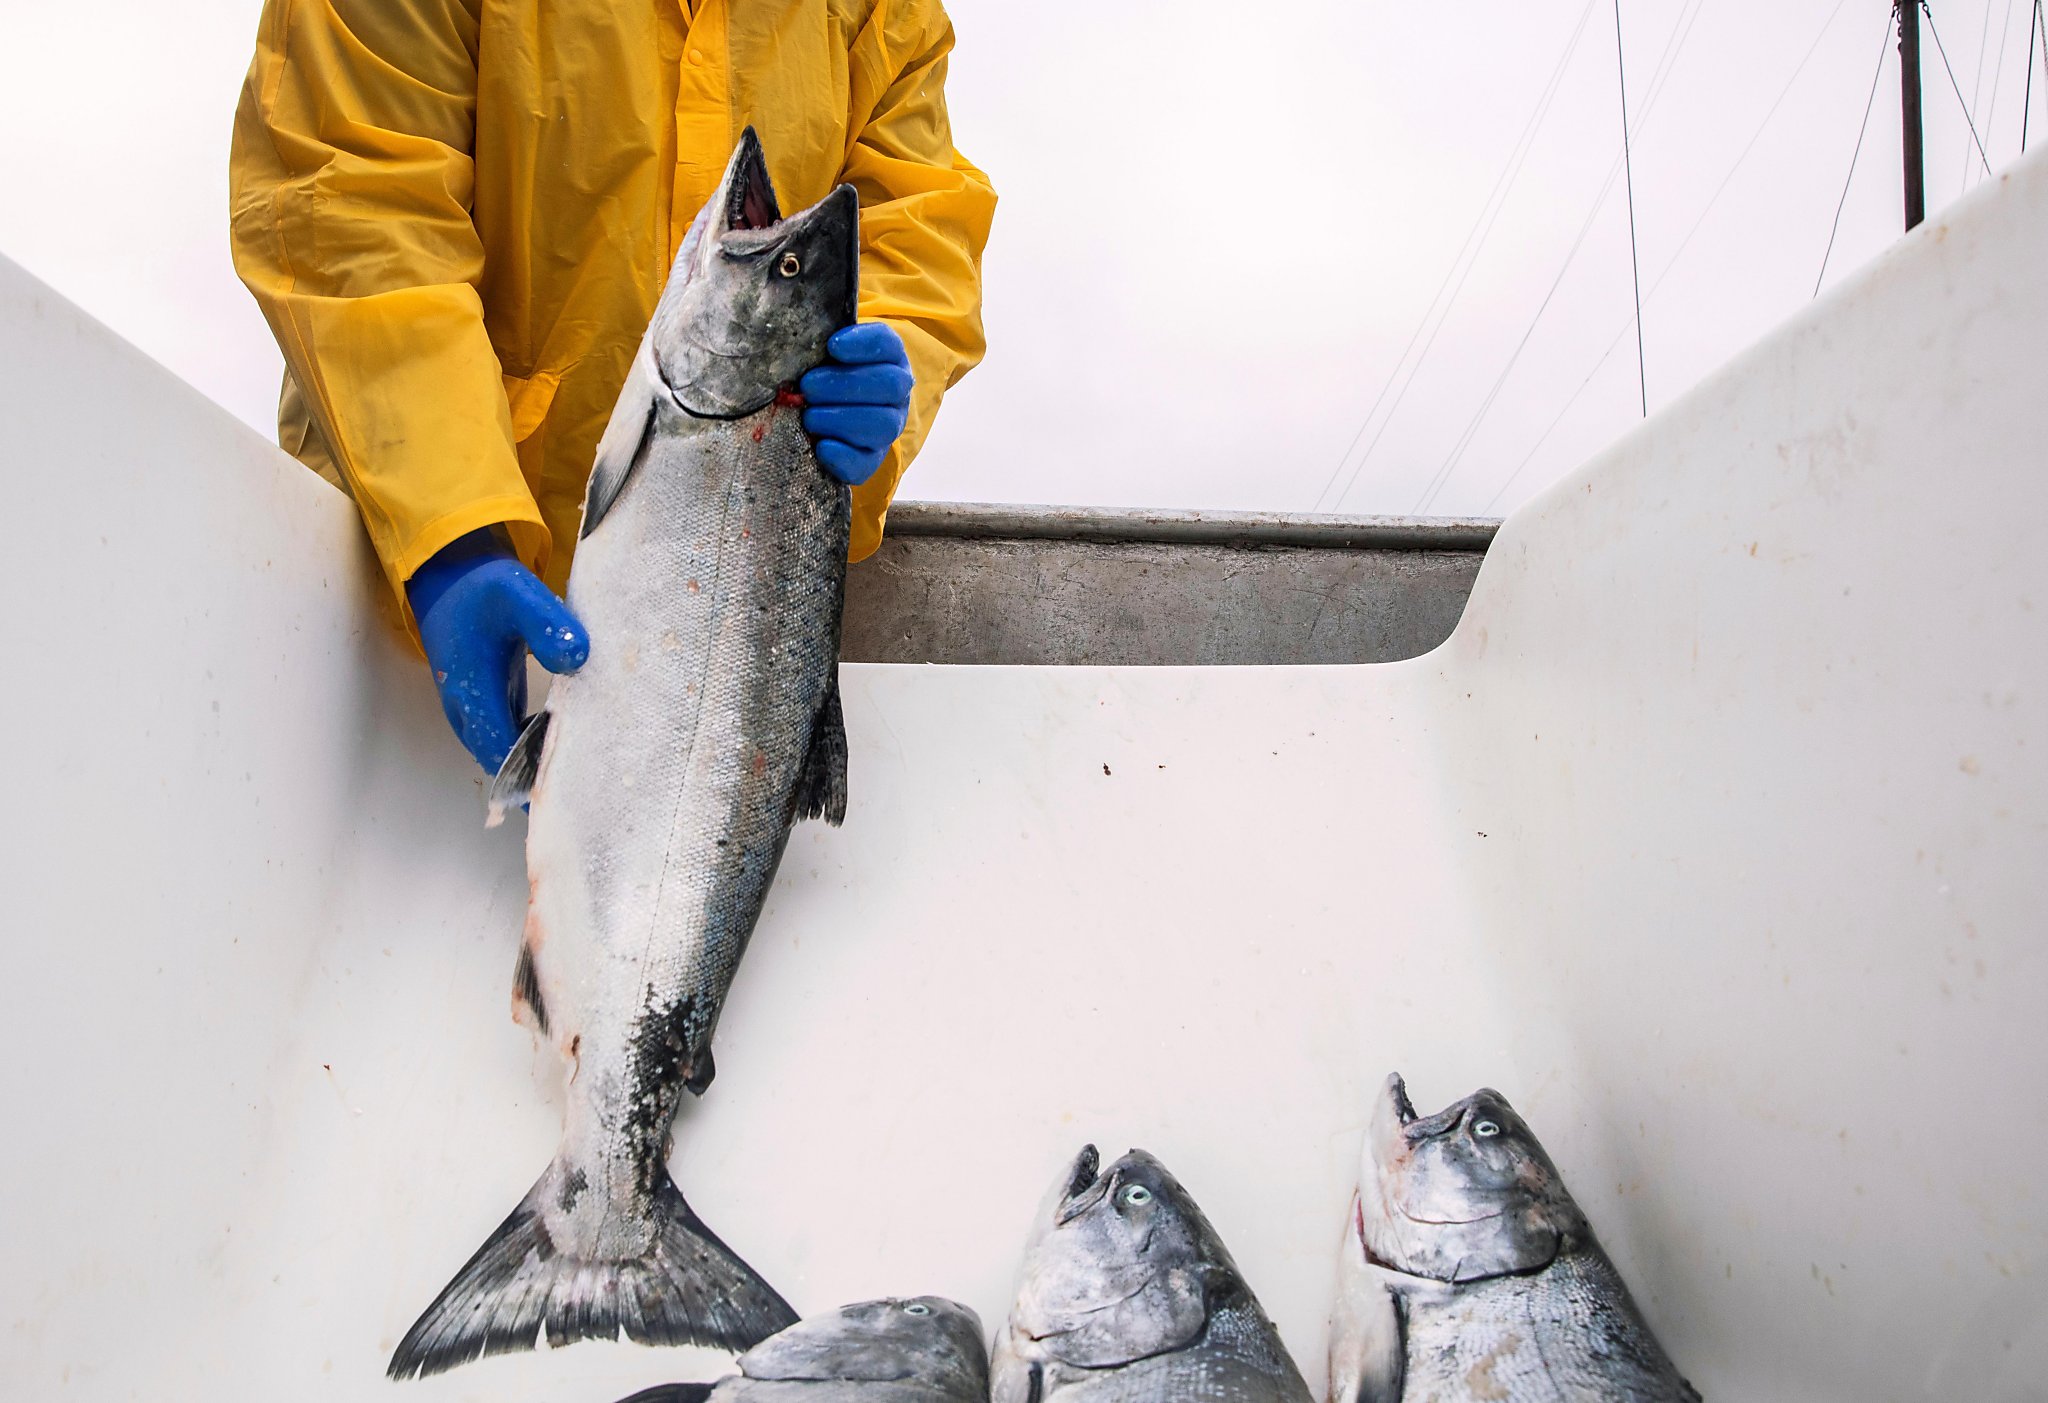 This year’s California commercial salmon season could be half the size